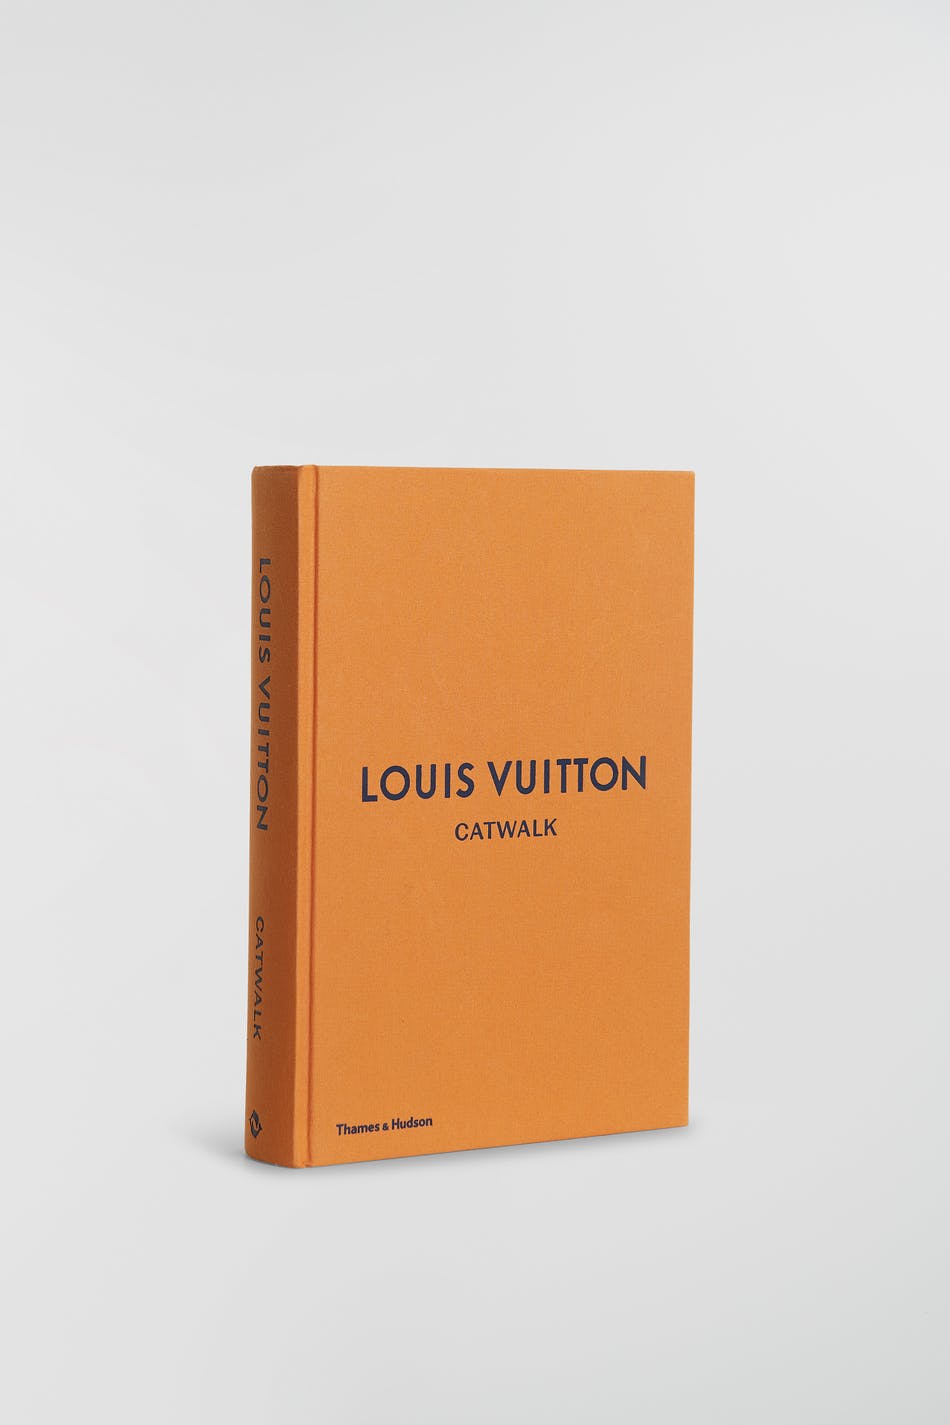 New LV book gina-home - Tricot